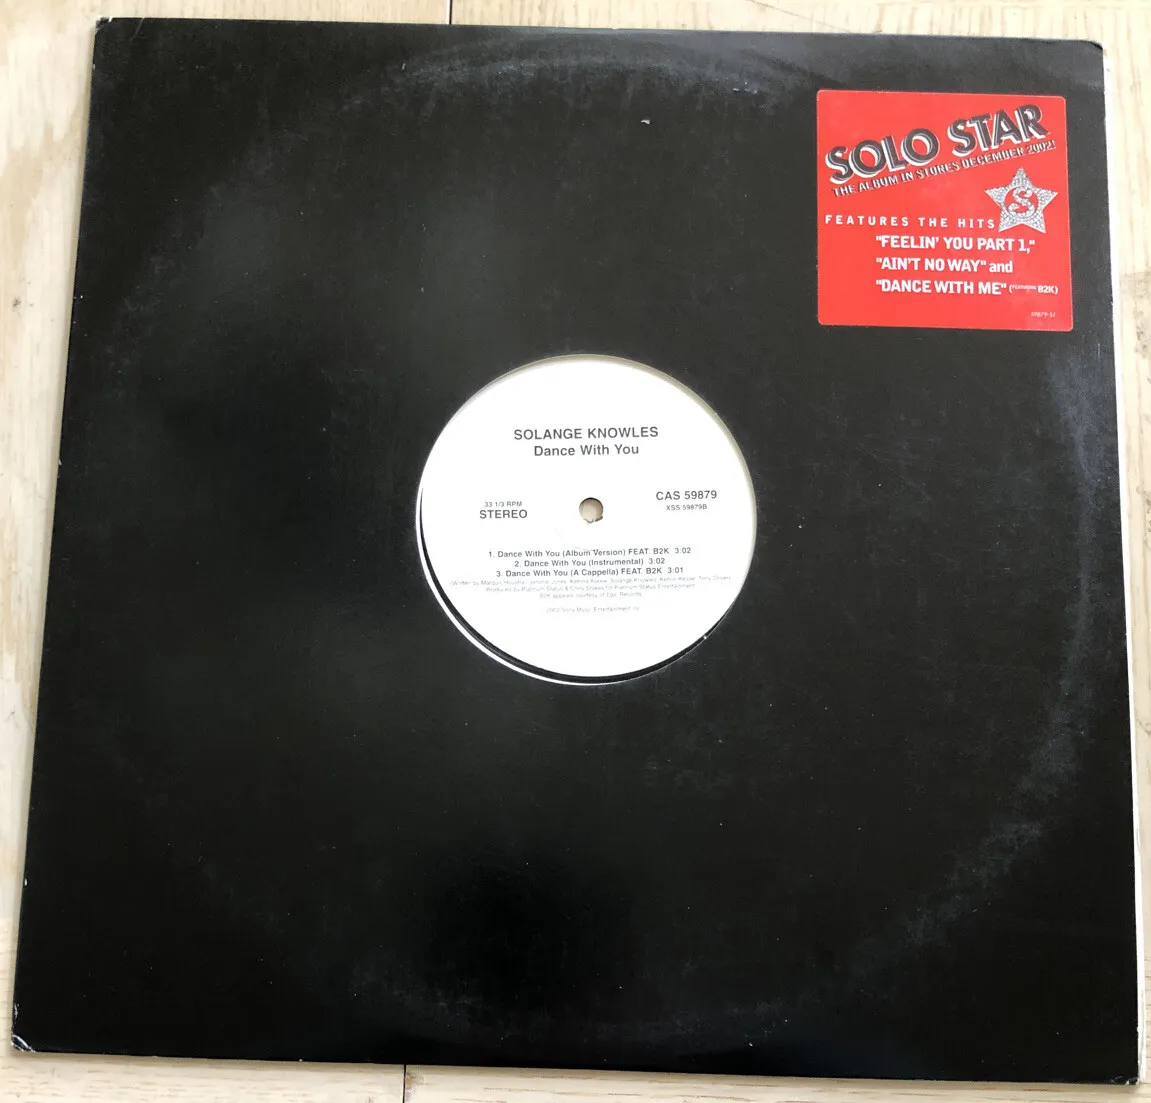 virkningsfuldhed Pinpoint Intakt SOLANGE KNOWLES DANCE WITH YOU FEELIN YOU PART II VINYL Record SINGLE | eBay